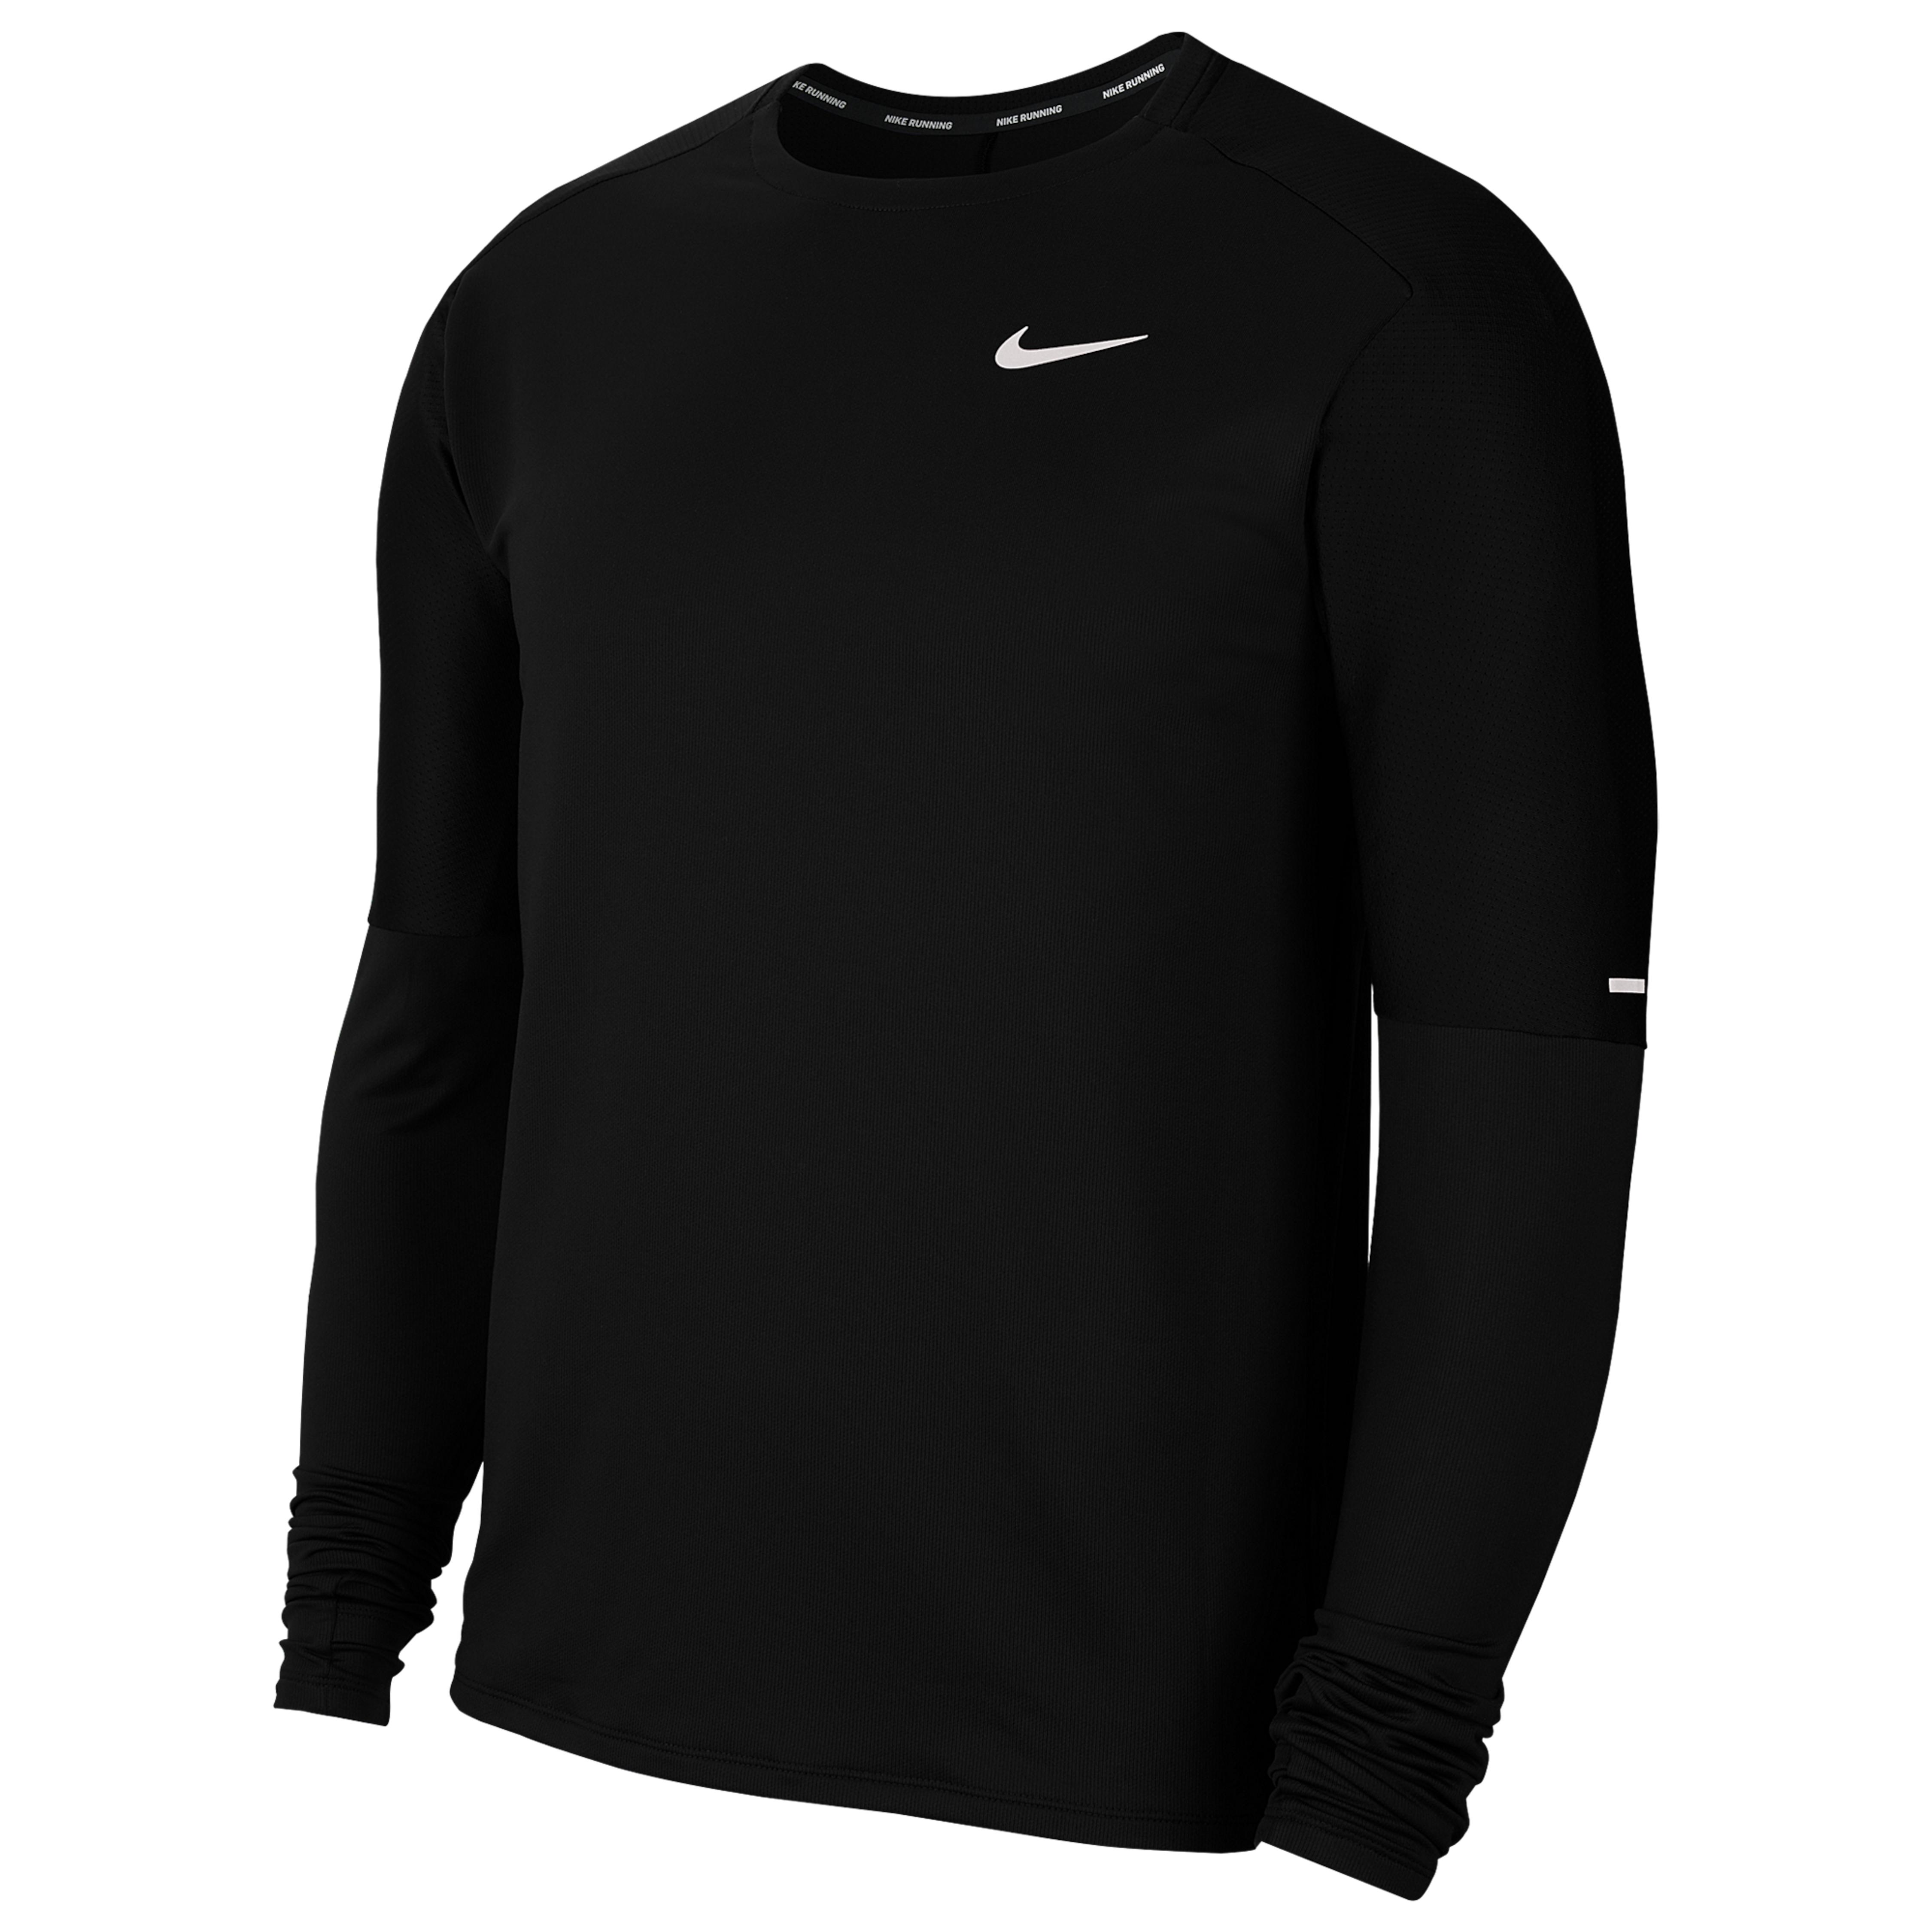 Nike Synthetic Element Long Sleeve Crew Shirts Top in Black for Men - Lyst